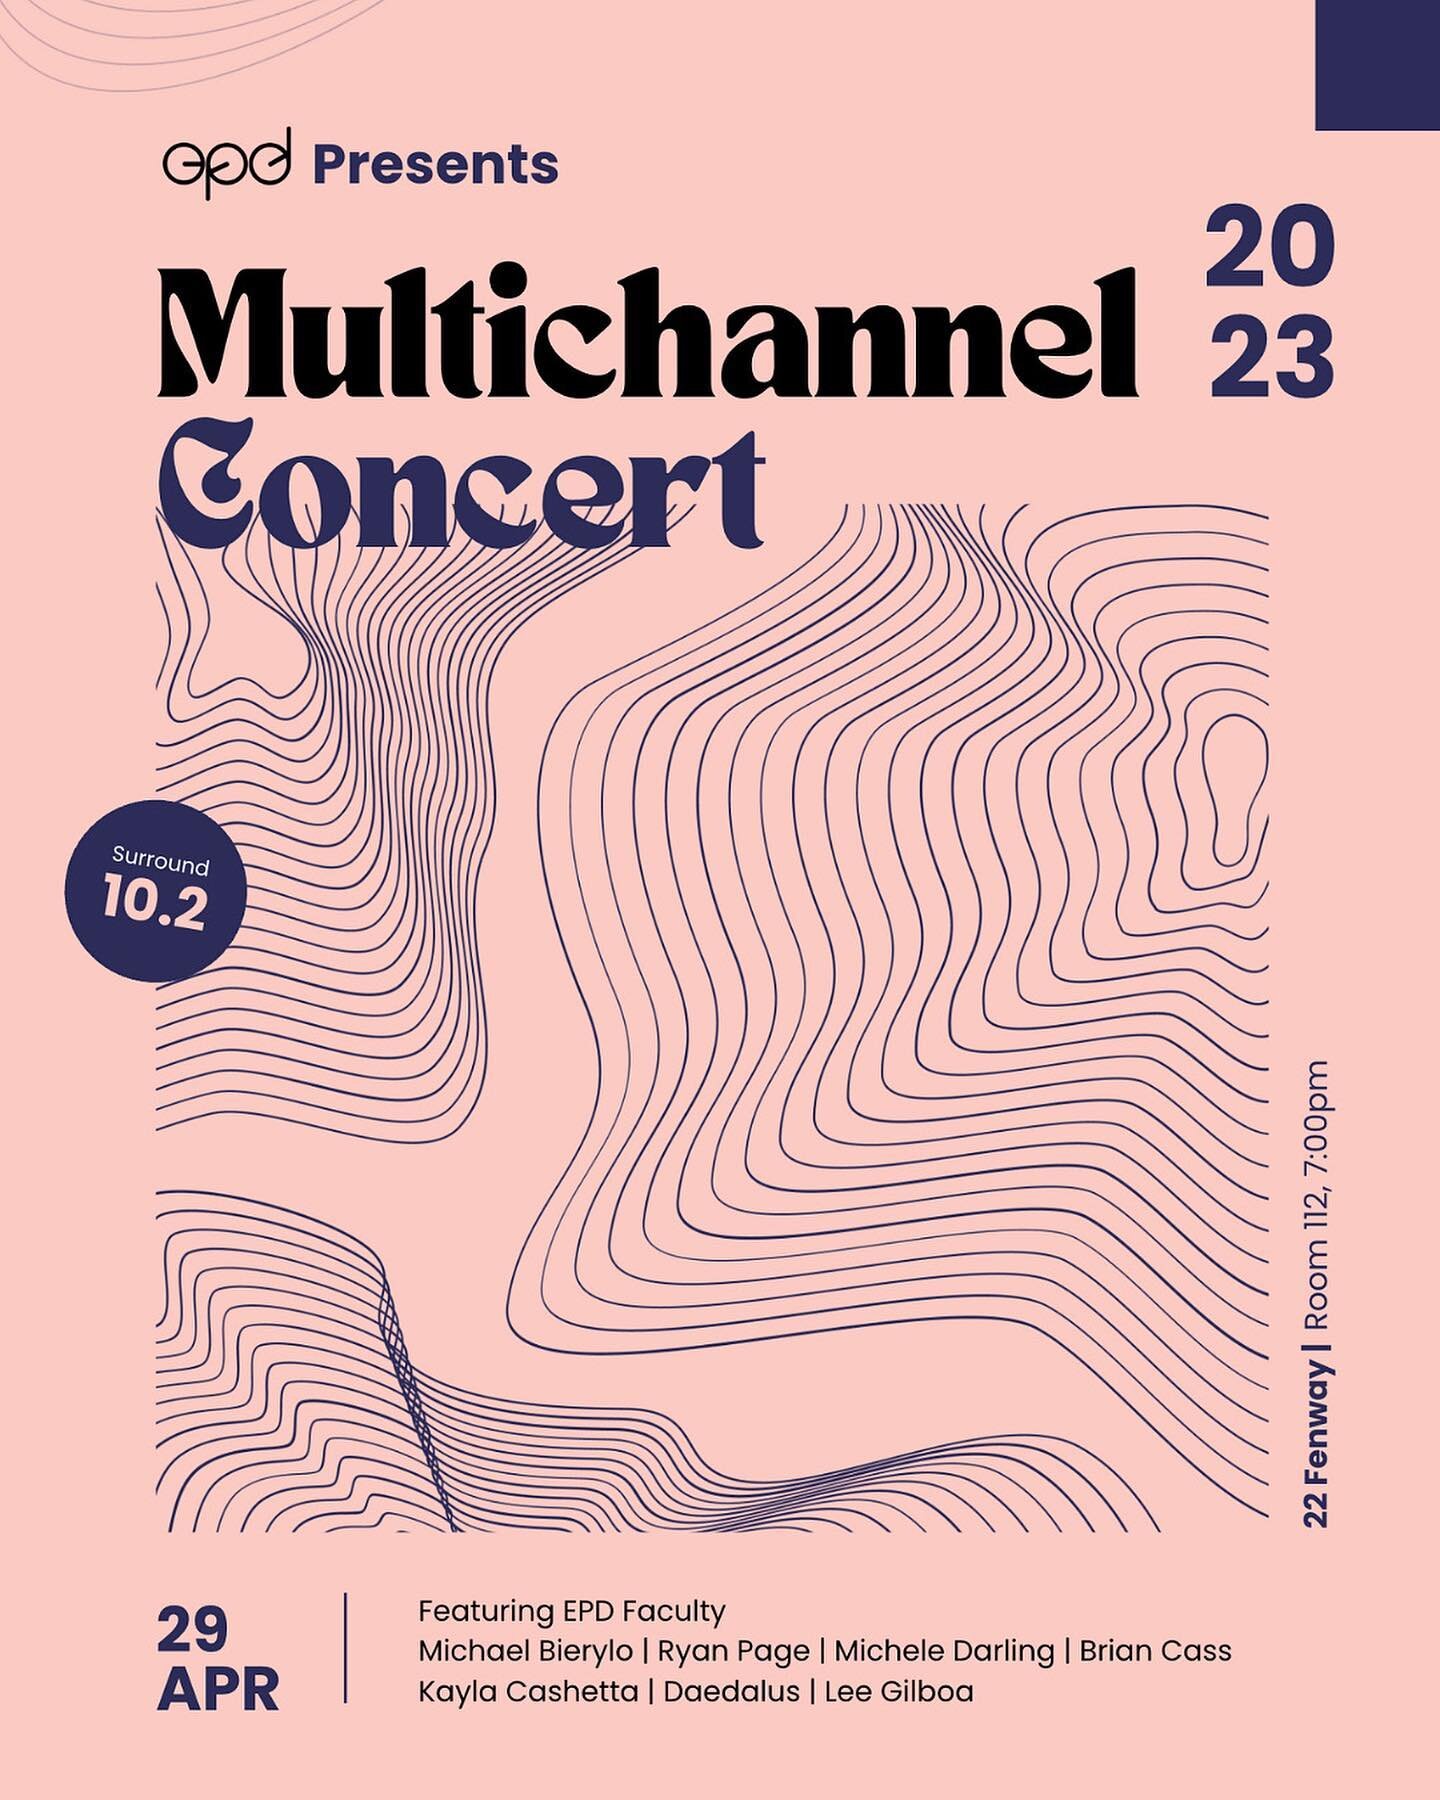 Really looking forward to the 2nd EPD faculty multichannel concert! Featuring work by the fantastic @mdarlingsound @kaylacashetta @bcassachusetts @daedelus Michael Bierylo, Ryan Page and also one of mine.
Saturday, April 29th at 7pm!

Thank you @epdb